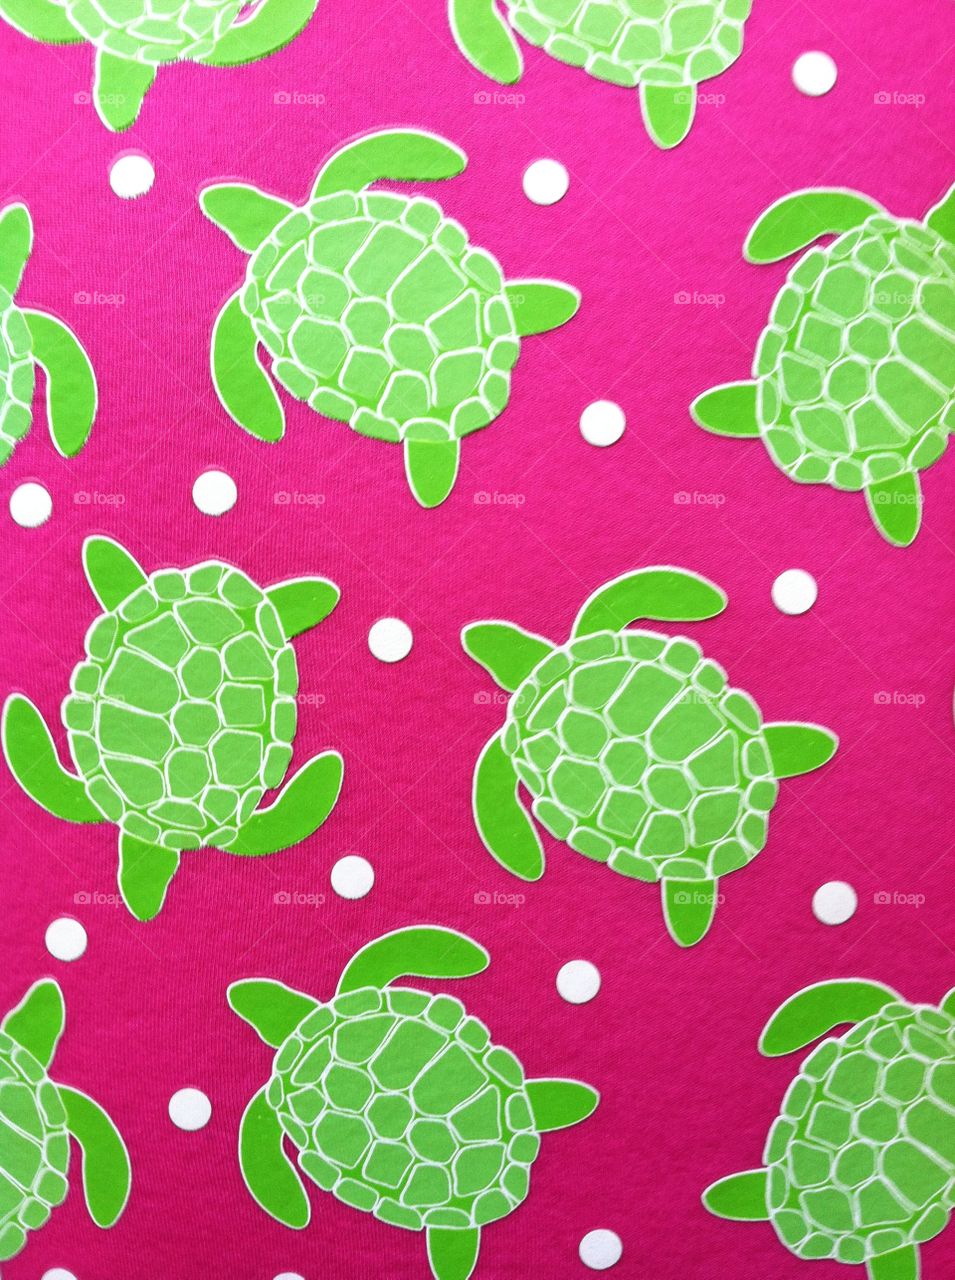 Bright green sea turtles against a bright pink background.